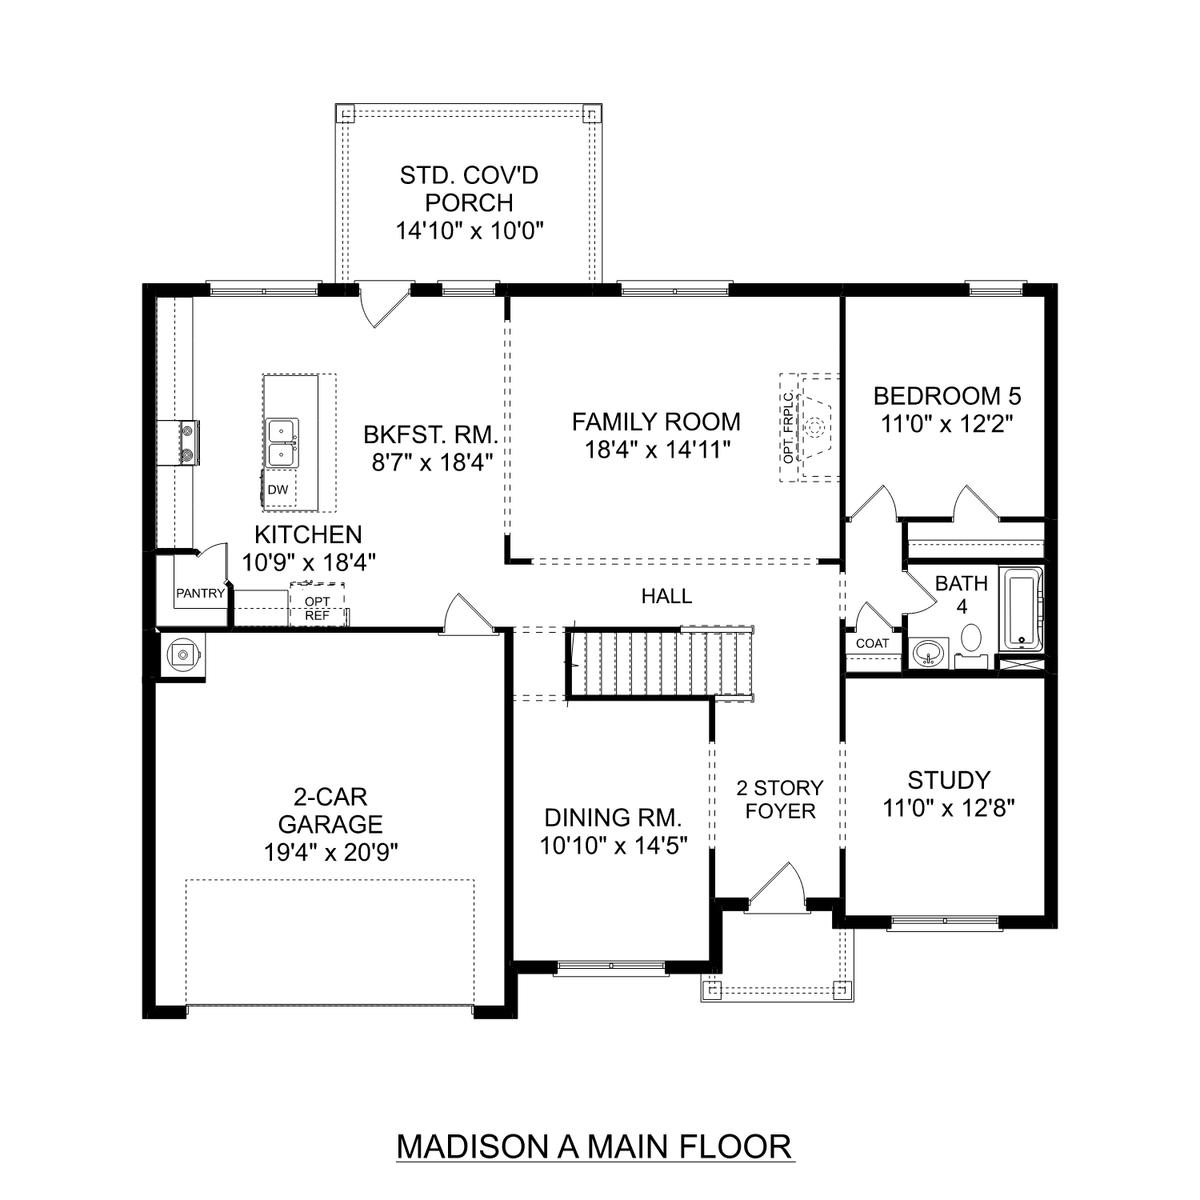 1 - The Madison A floor plan layout for 2107 Brandon Drive in Davidson Homes' North Ridge community.